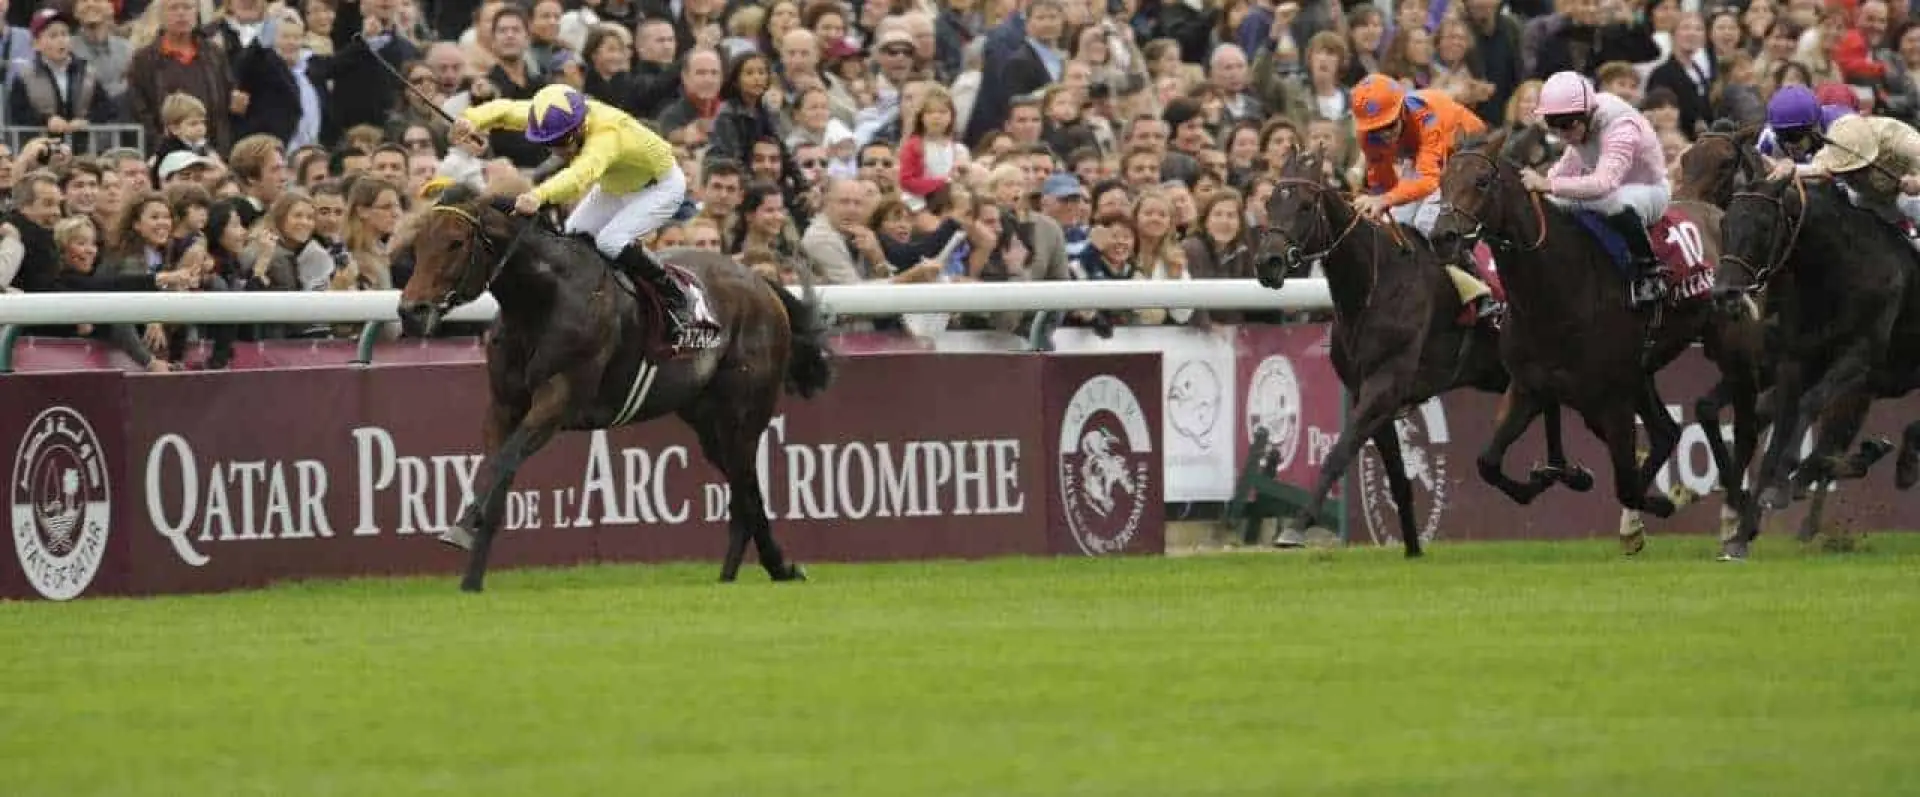 Coral horse racing experts look back on five great modern Prix de l'Arc de Triomphe winners, including Sea The Stars trivia.